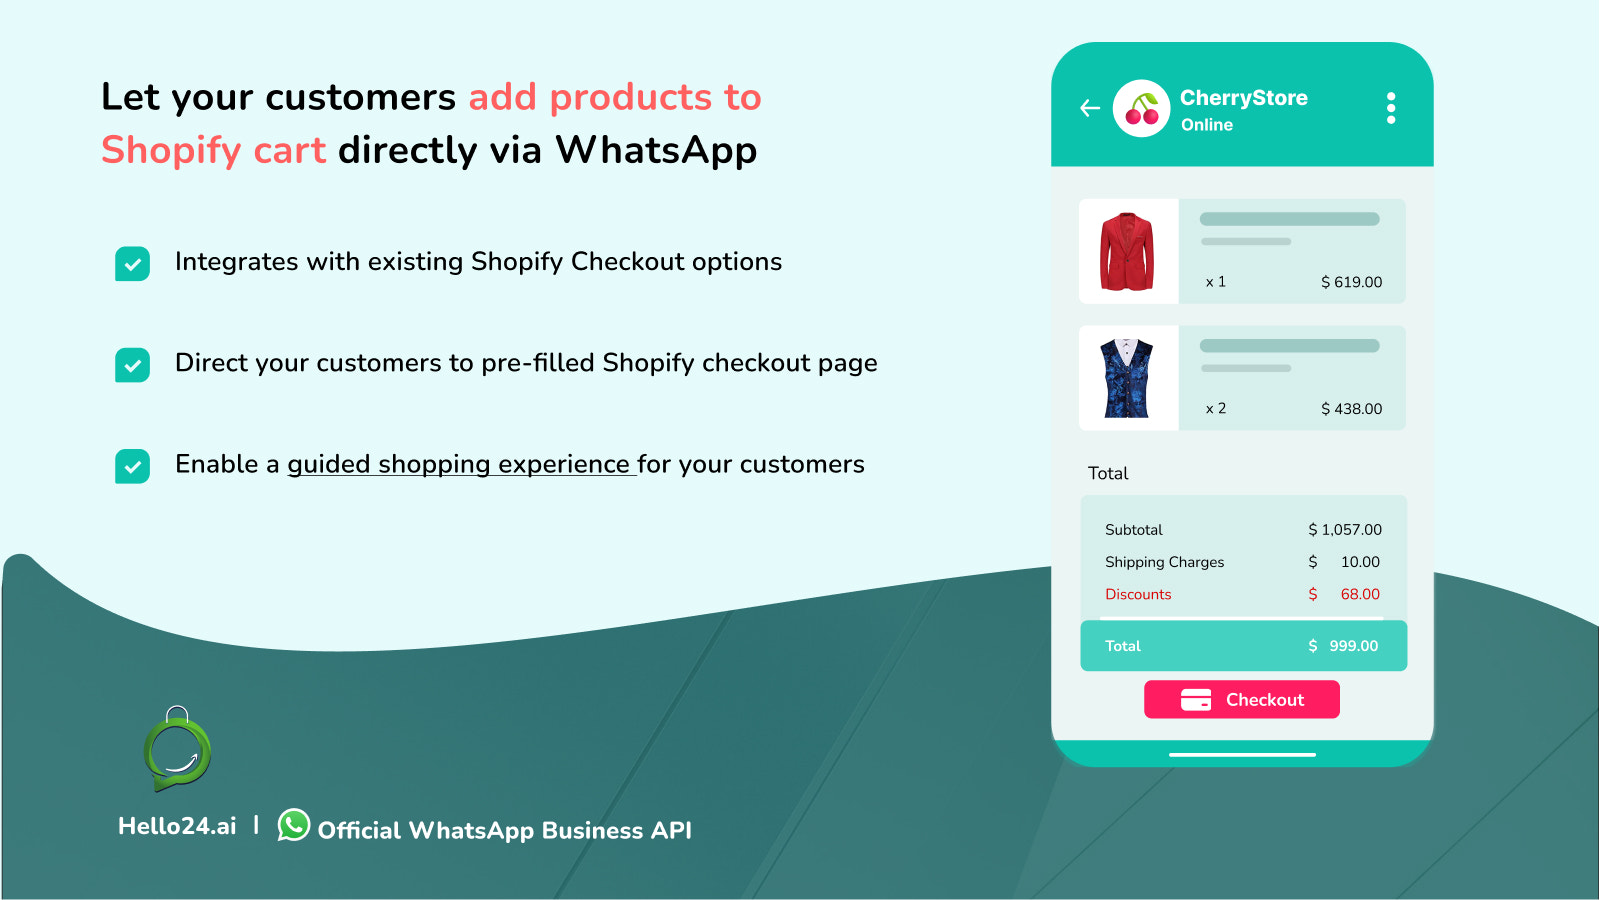 Enable guided shopping experience for your customers